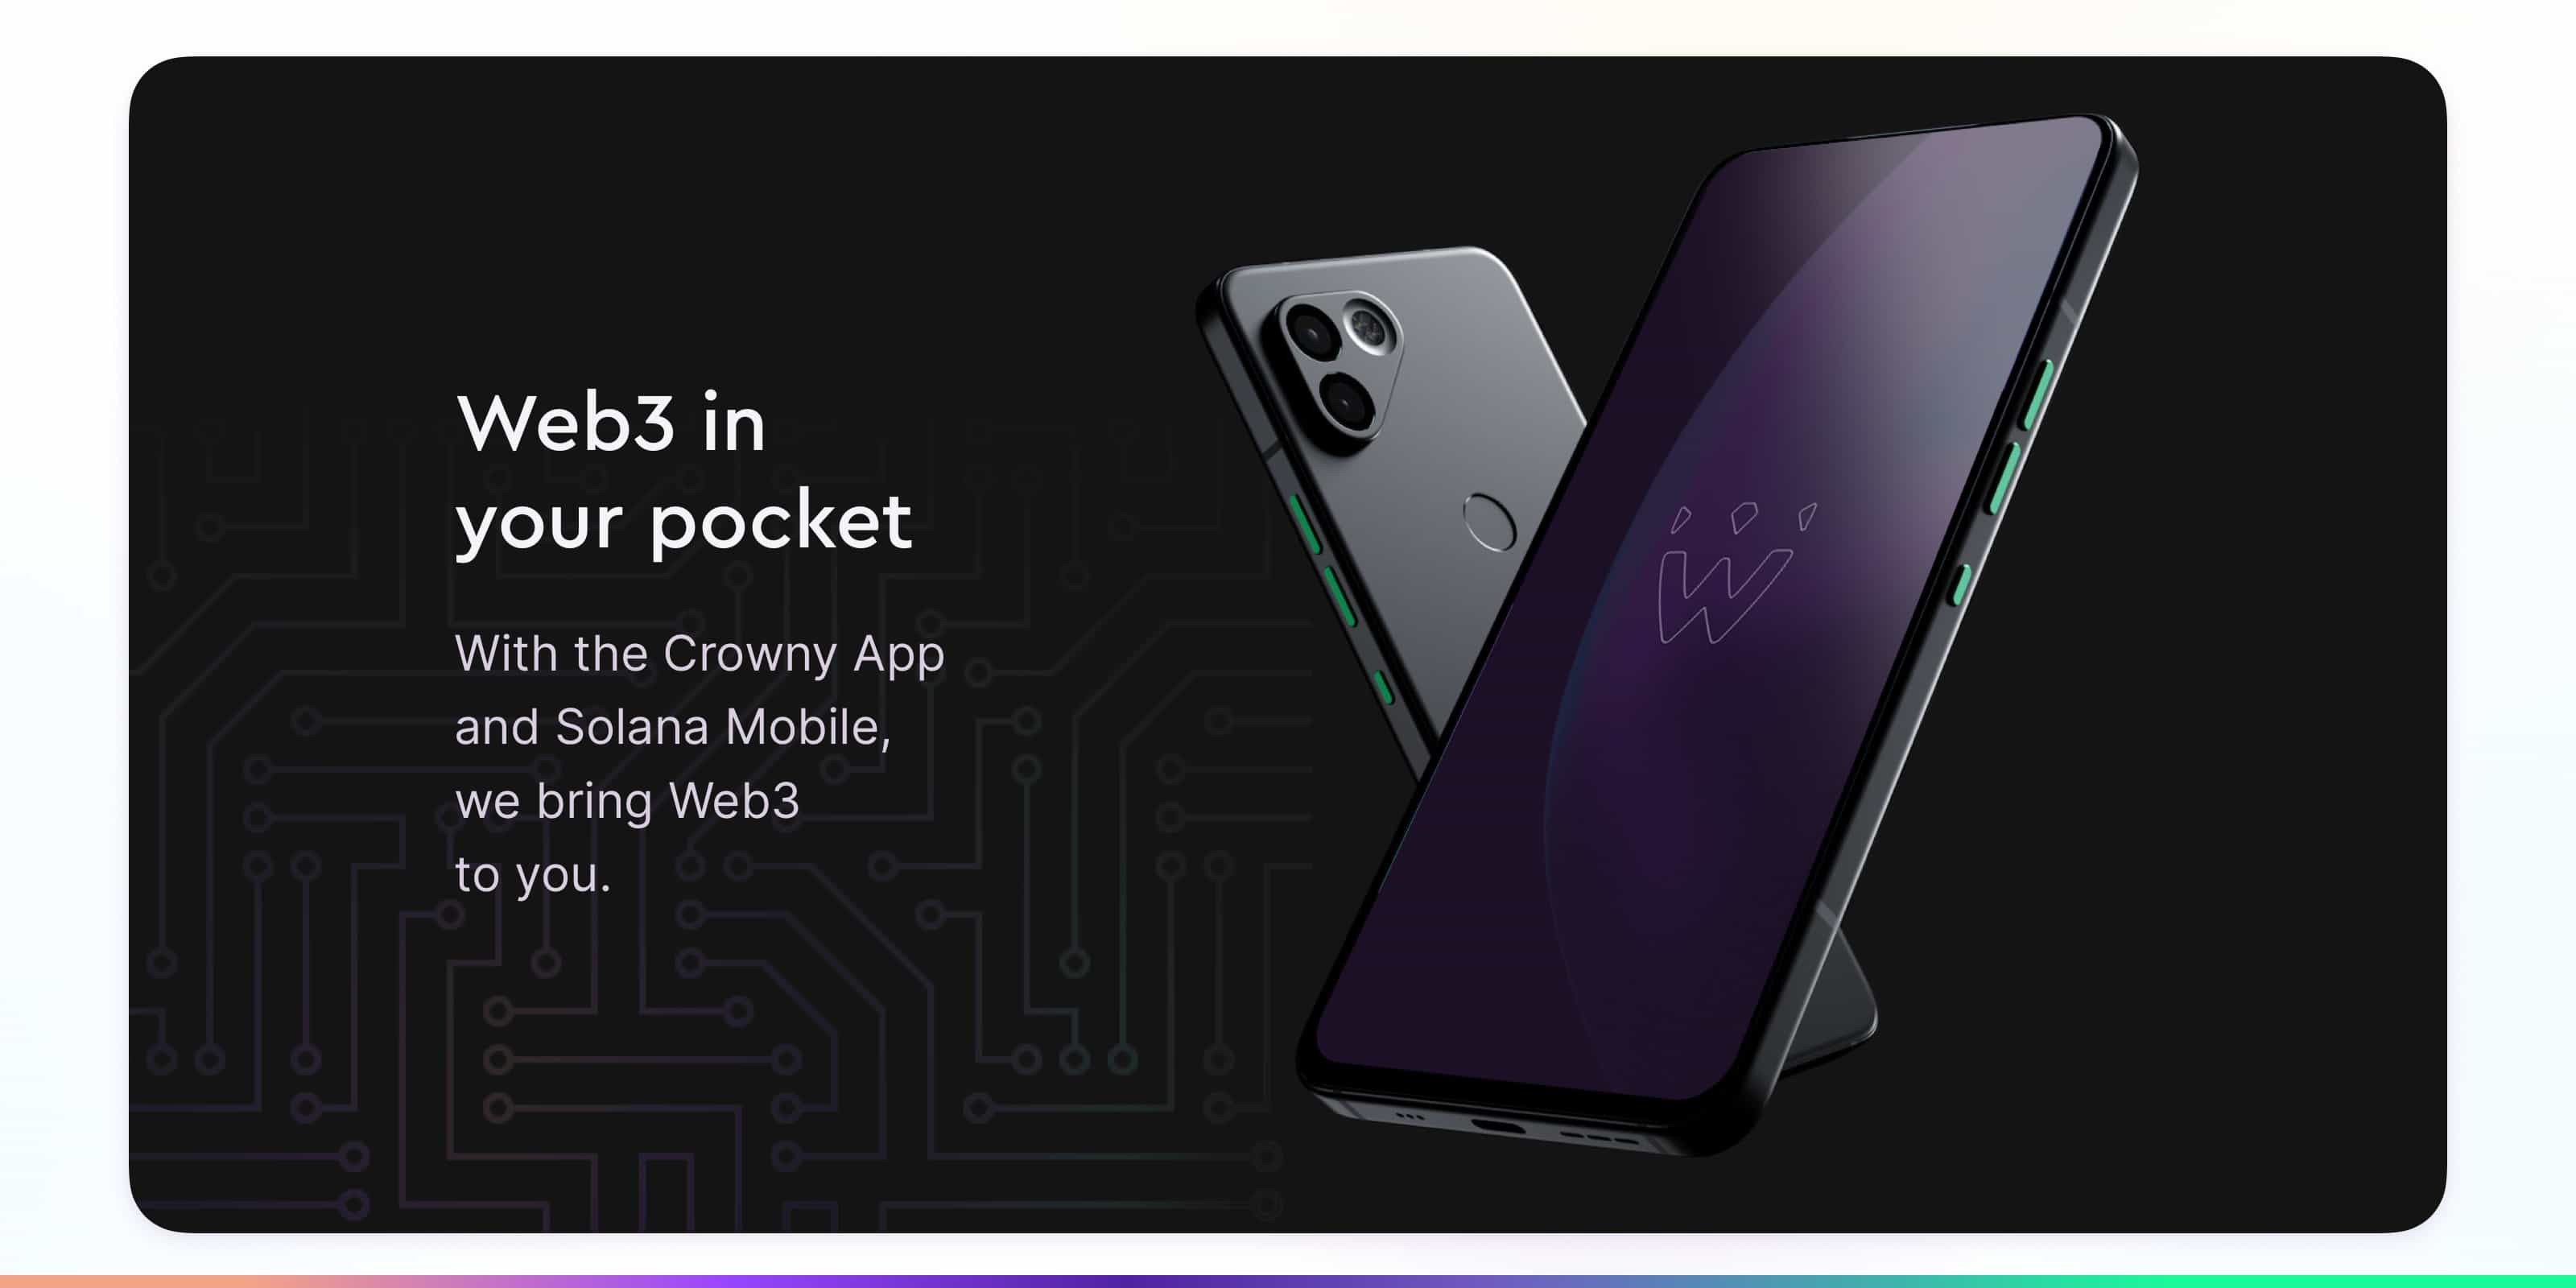 Crowny App and Solana Mobile bring Web3 in your pocket